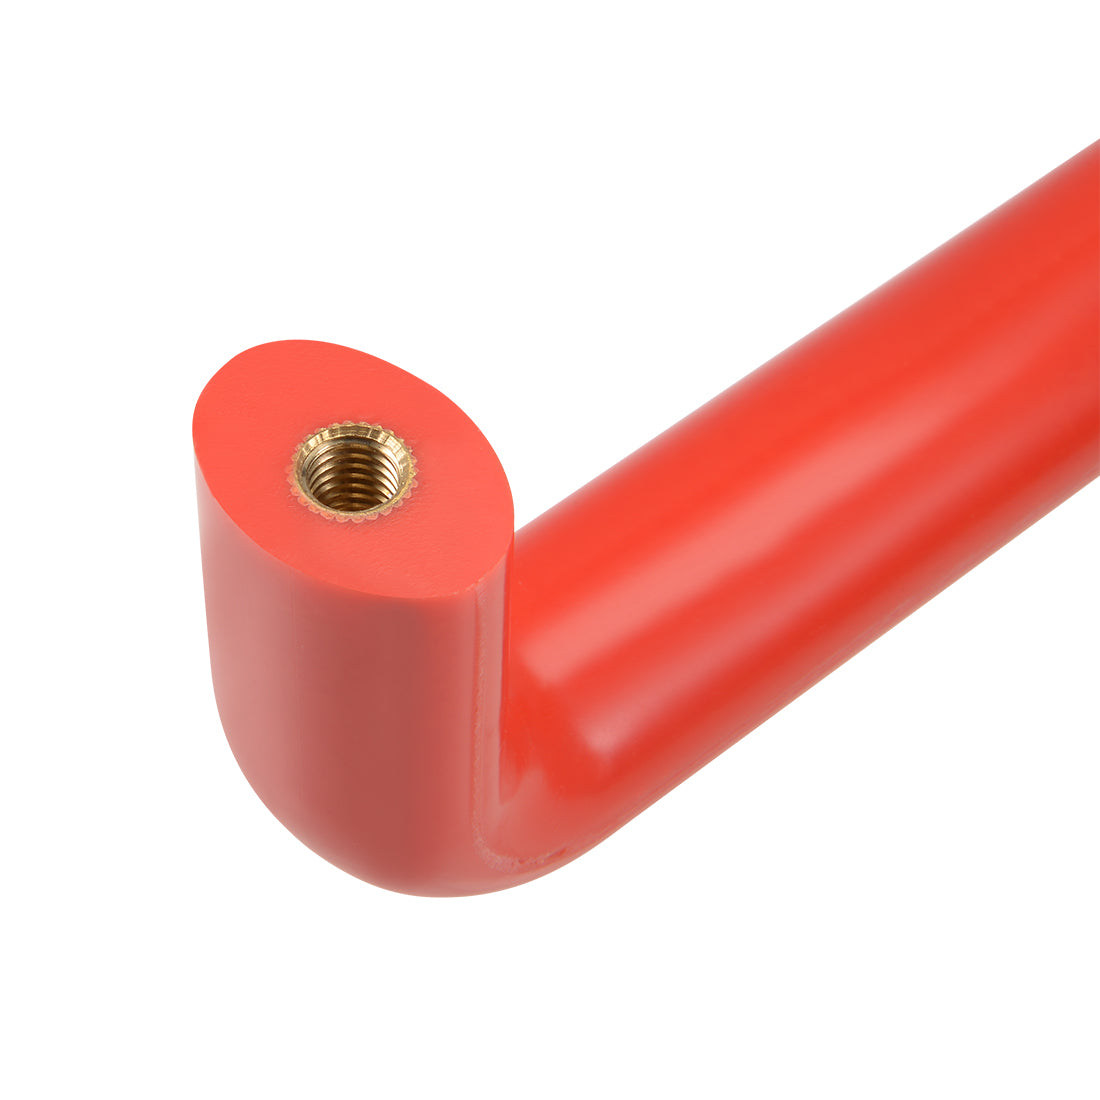 uxcell Uxcell Bakelite Plastic Pulls Handle 180mm Hole Centers Red for Industrial Machine 2Pcs